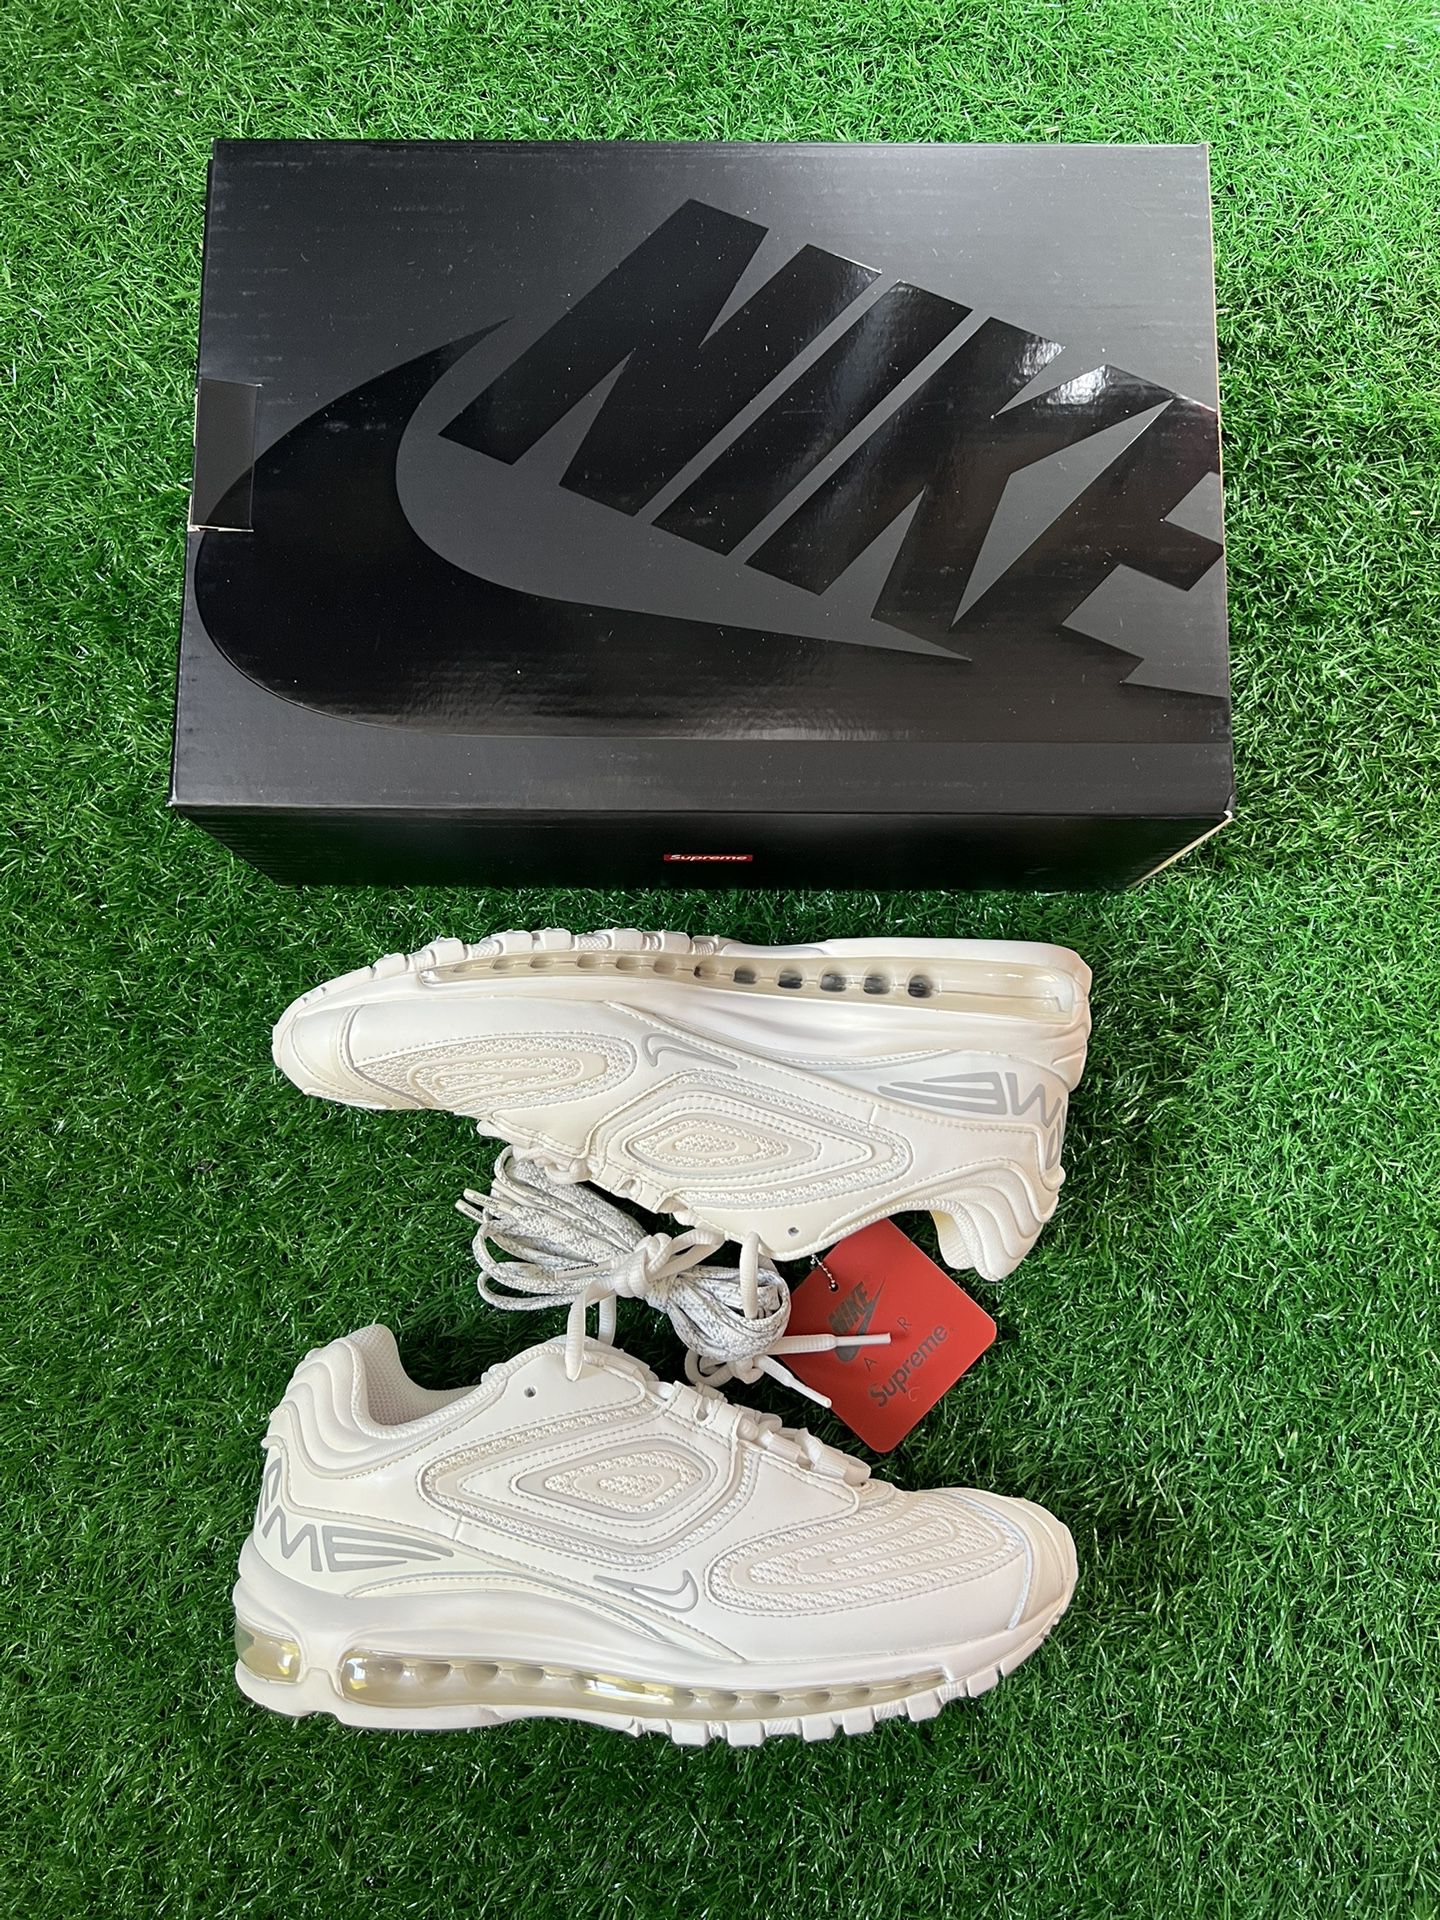 Nike Air Max 98 TL “Supreme White” for in West New York, NJ - OfferUp